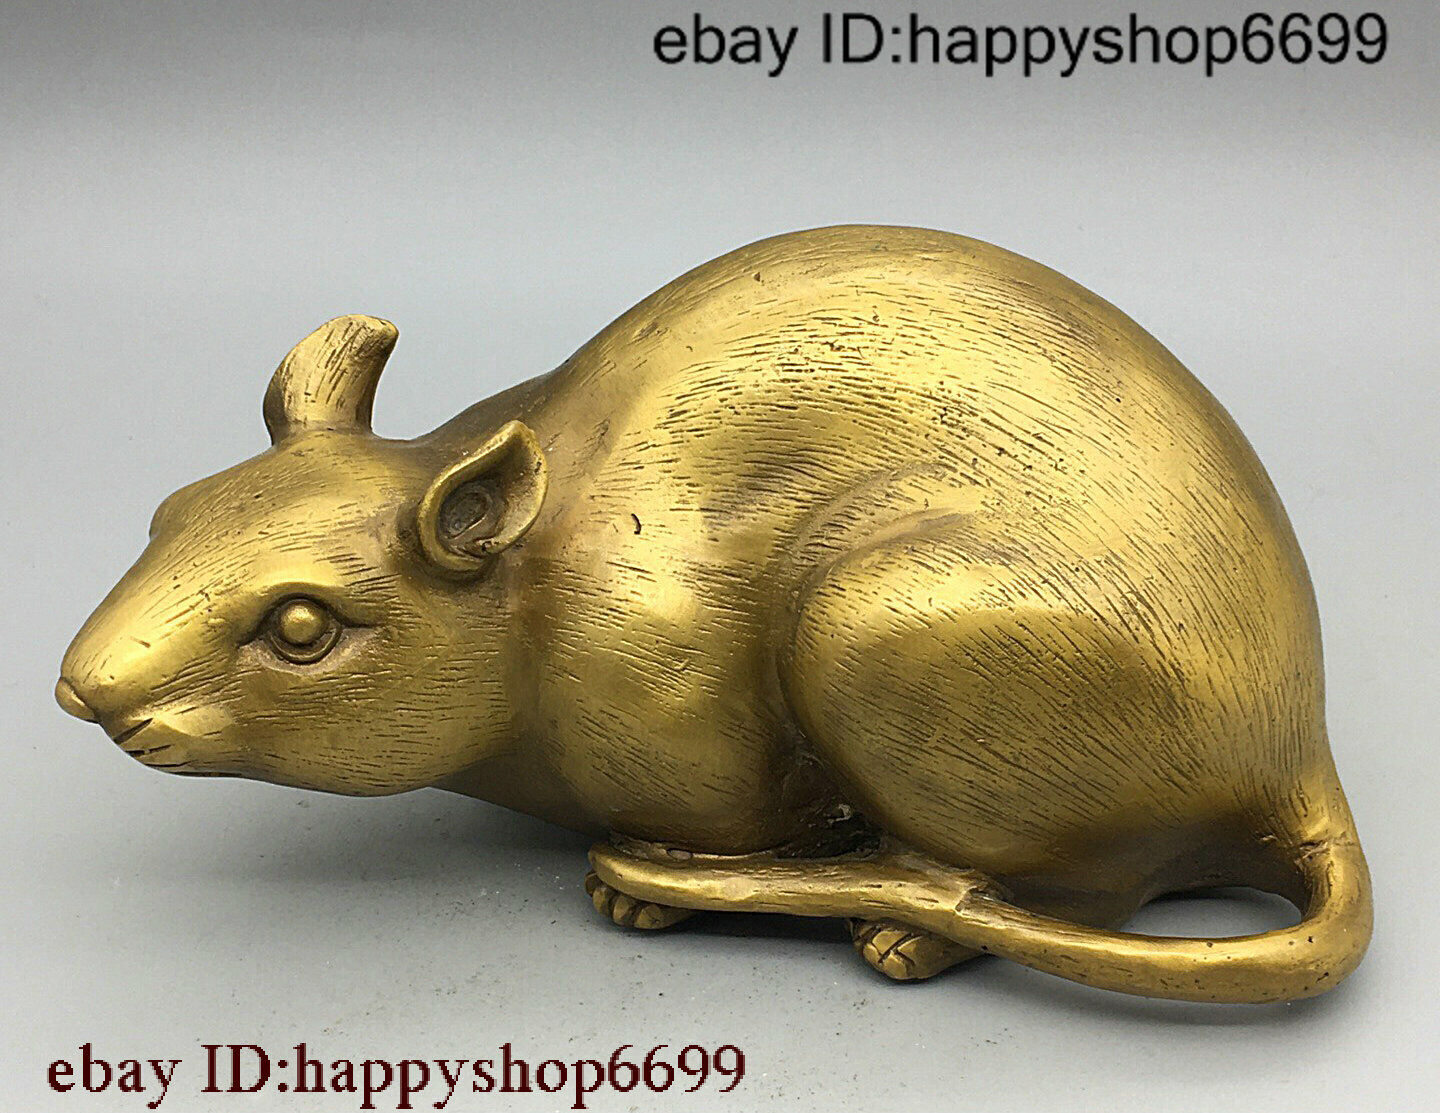 Collect China Dynasty Copper Bronze Fengshui 12 Zodiac Year Animal Mouse Statue